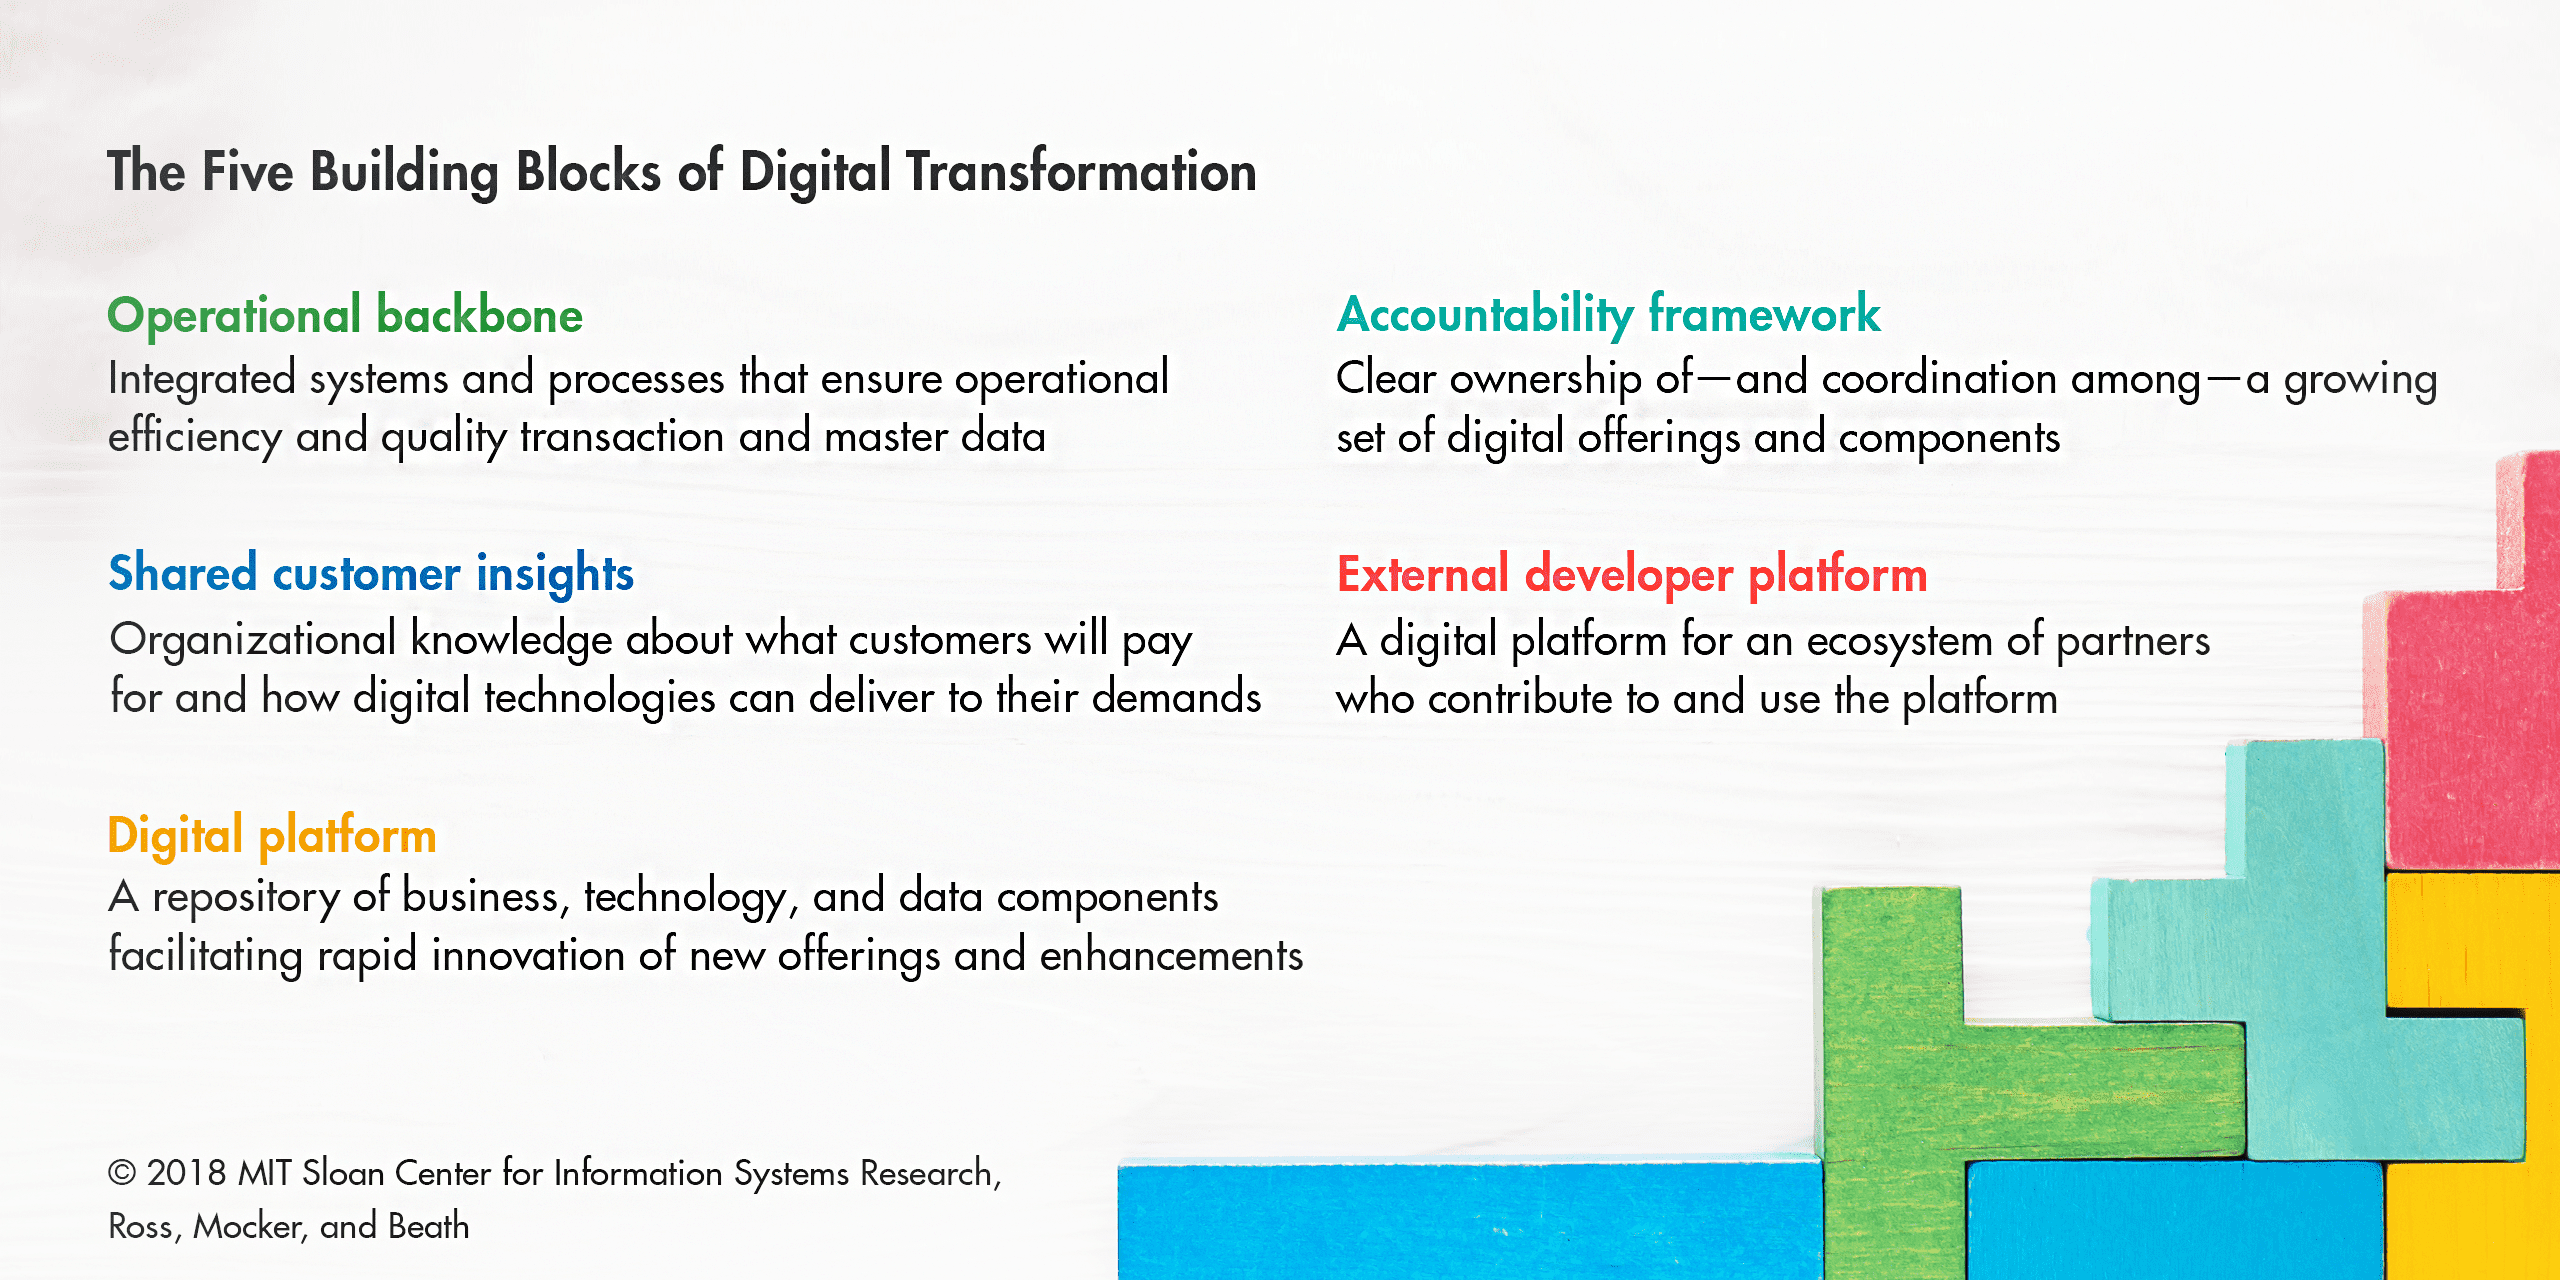 The building blocks of digital transformation. Copywrite MIT Sloan Center for Information Systems Research, Ross Mocker and Beath